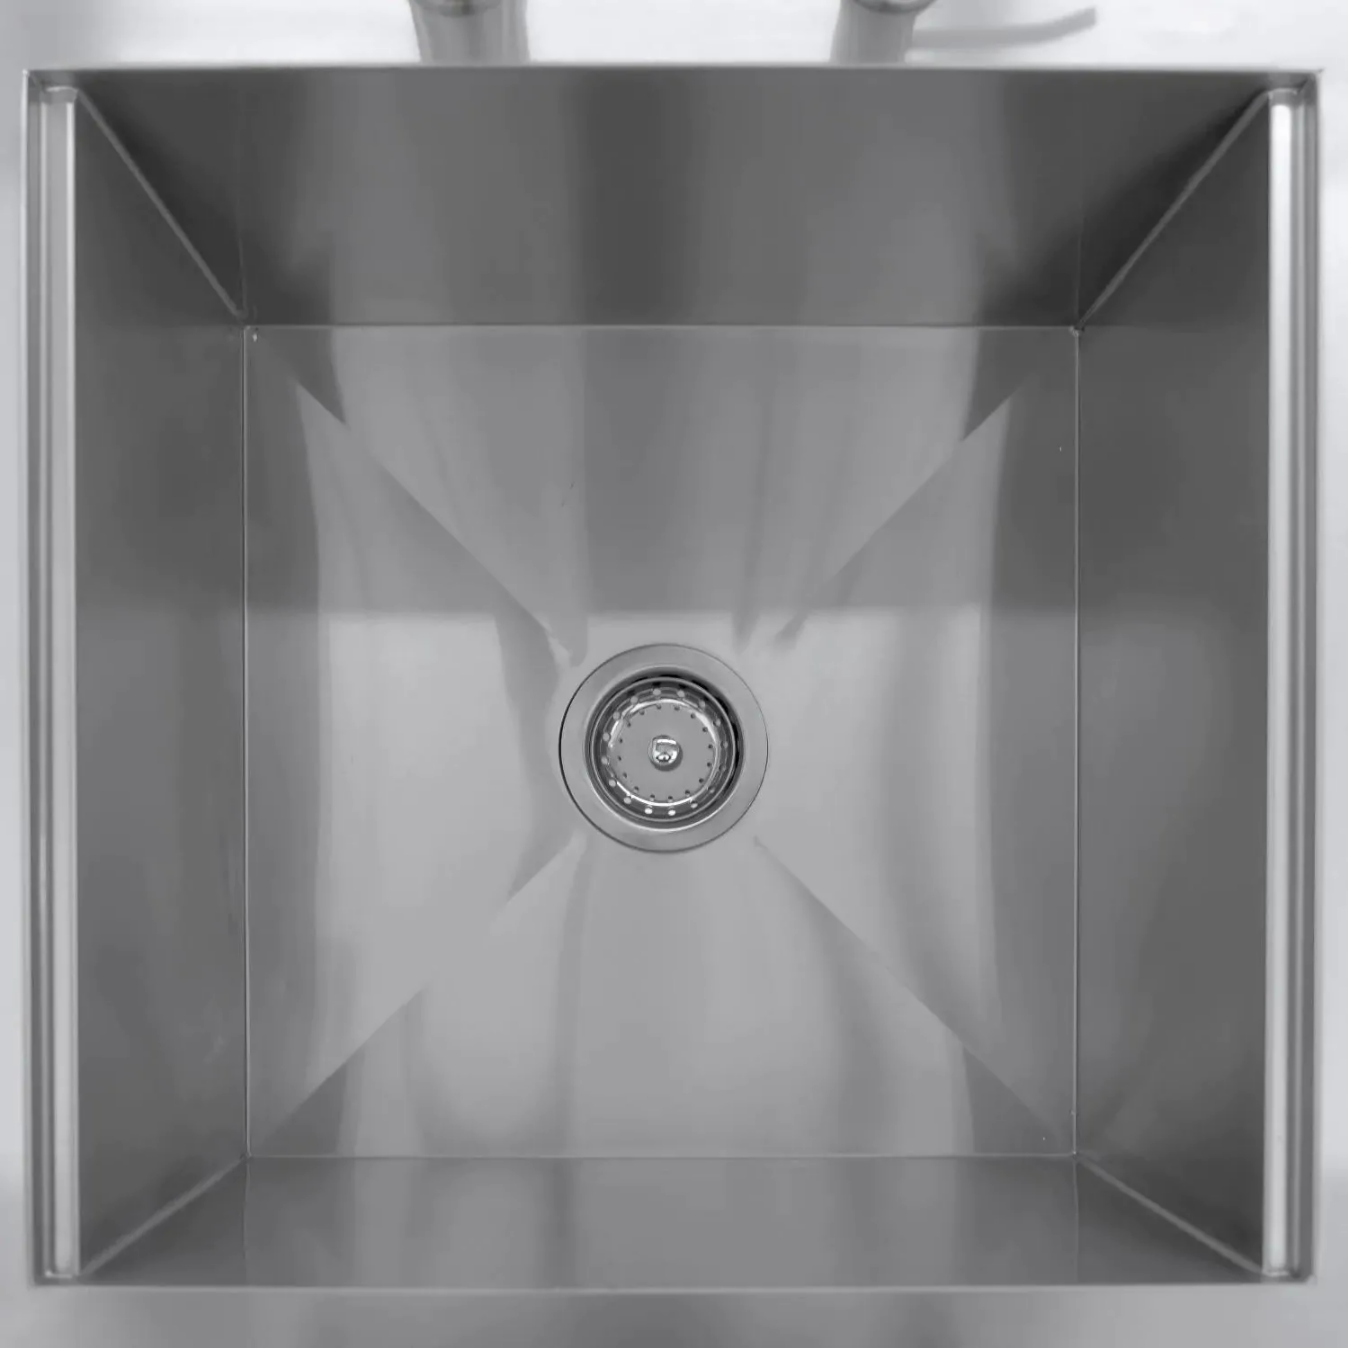 PCM 260 Series 21" Outdoor Rated Stainless Steel Drop In Sink With Hot/Cold Faucet